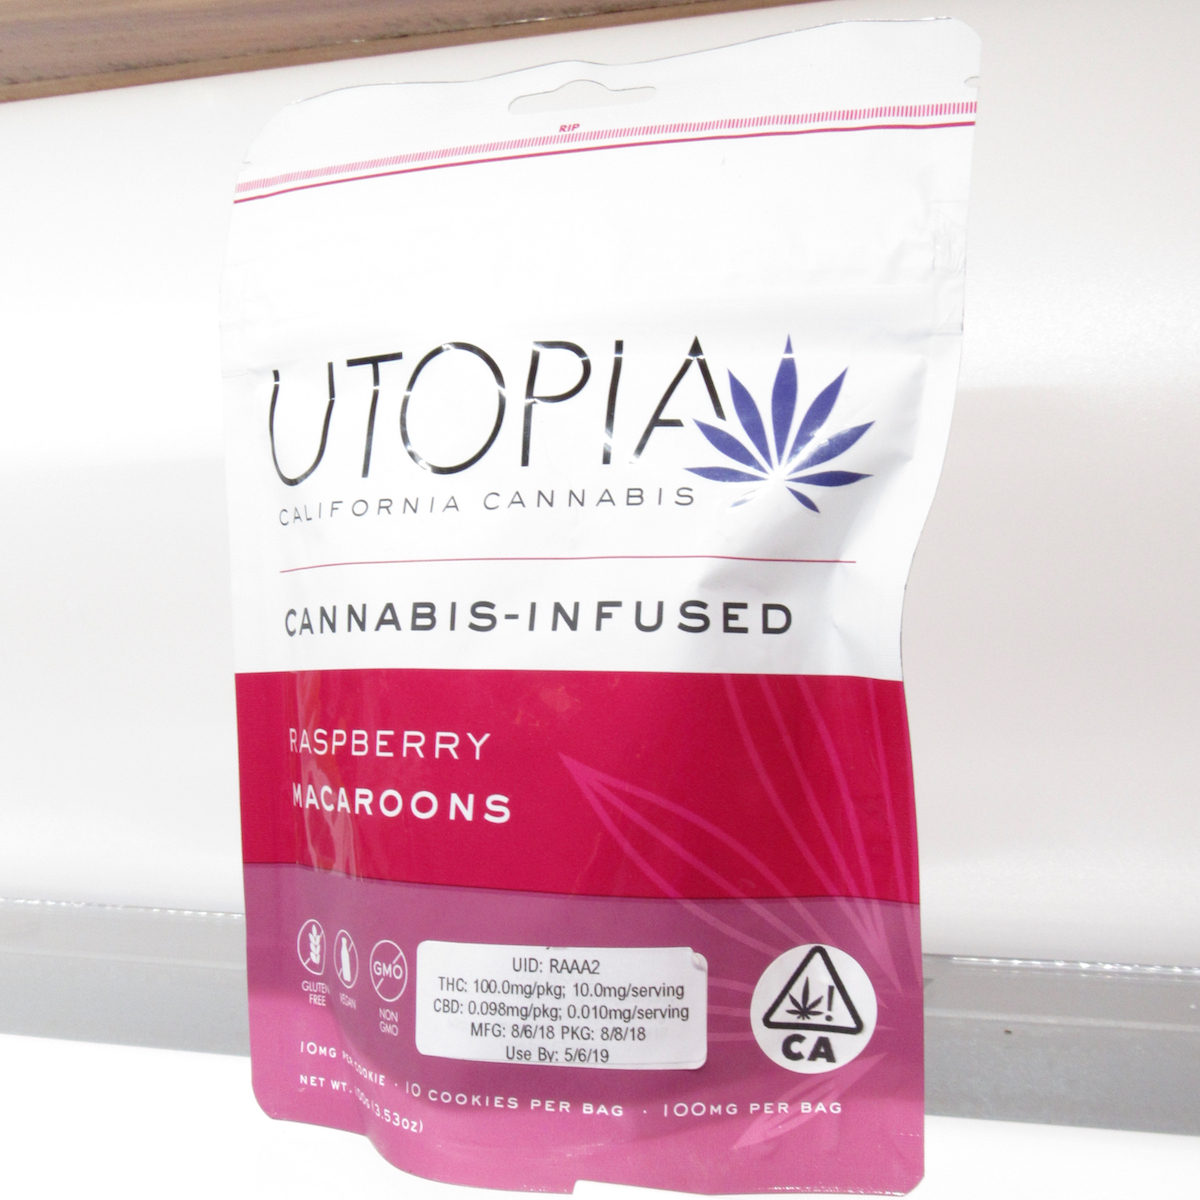 Utopia products can be found statewide. (David Downs/Leafly)